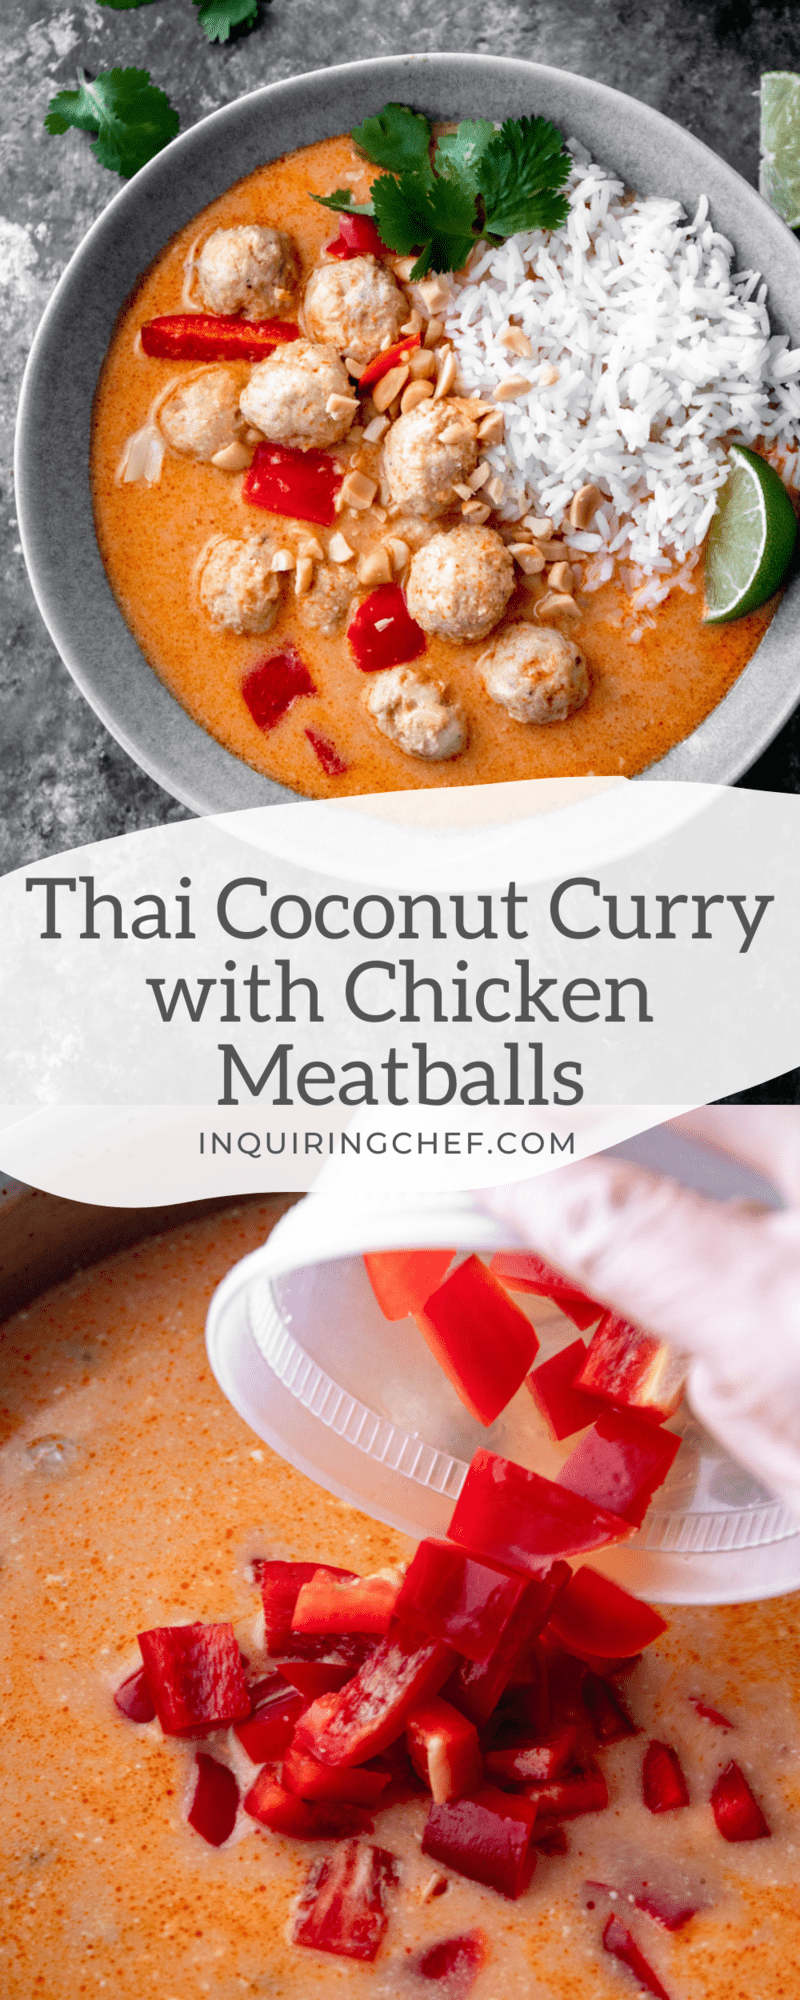 thai coconut curry with meatballs